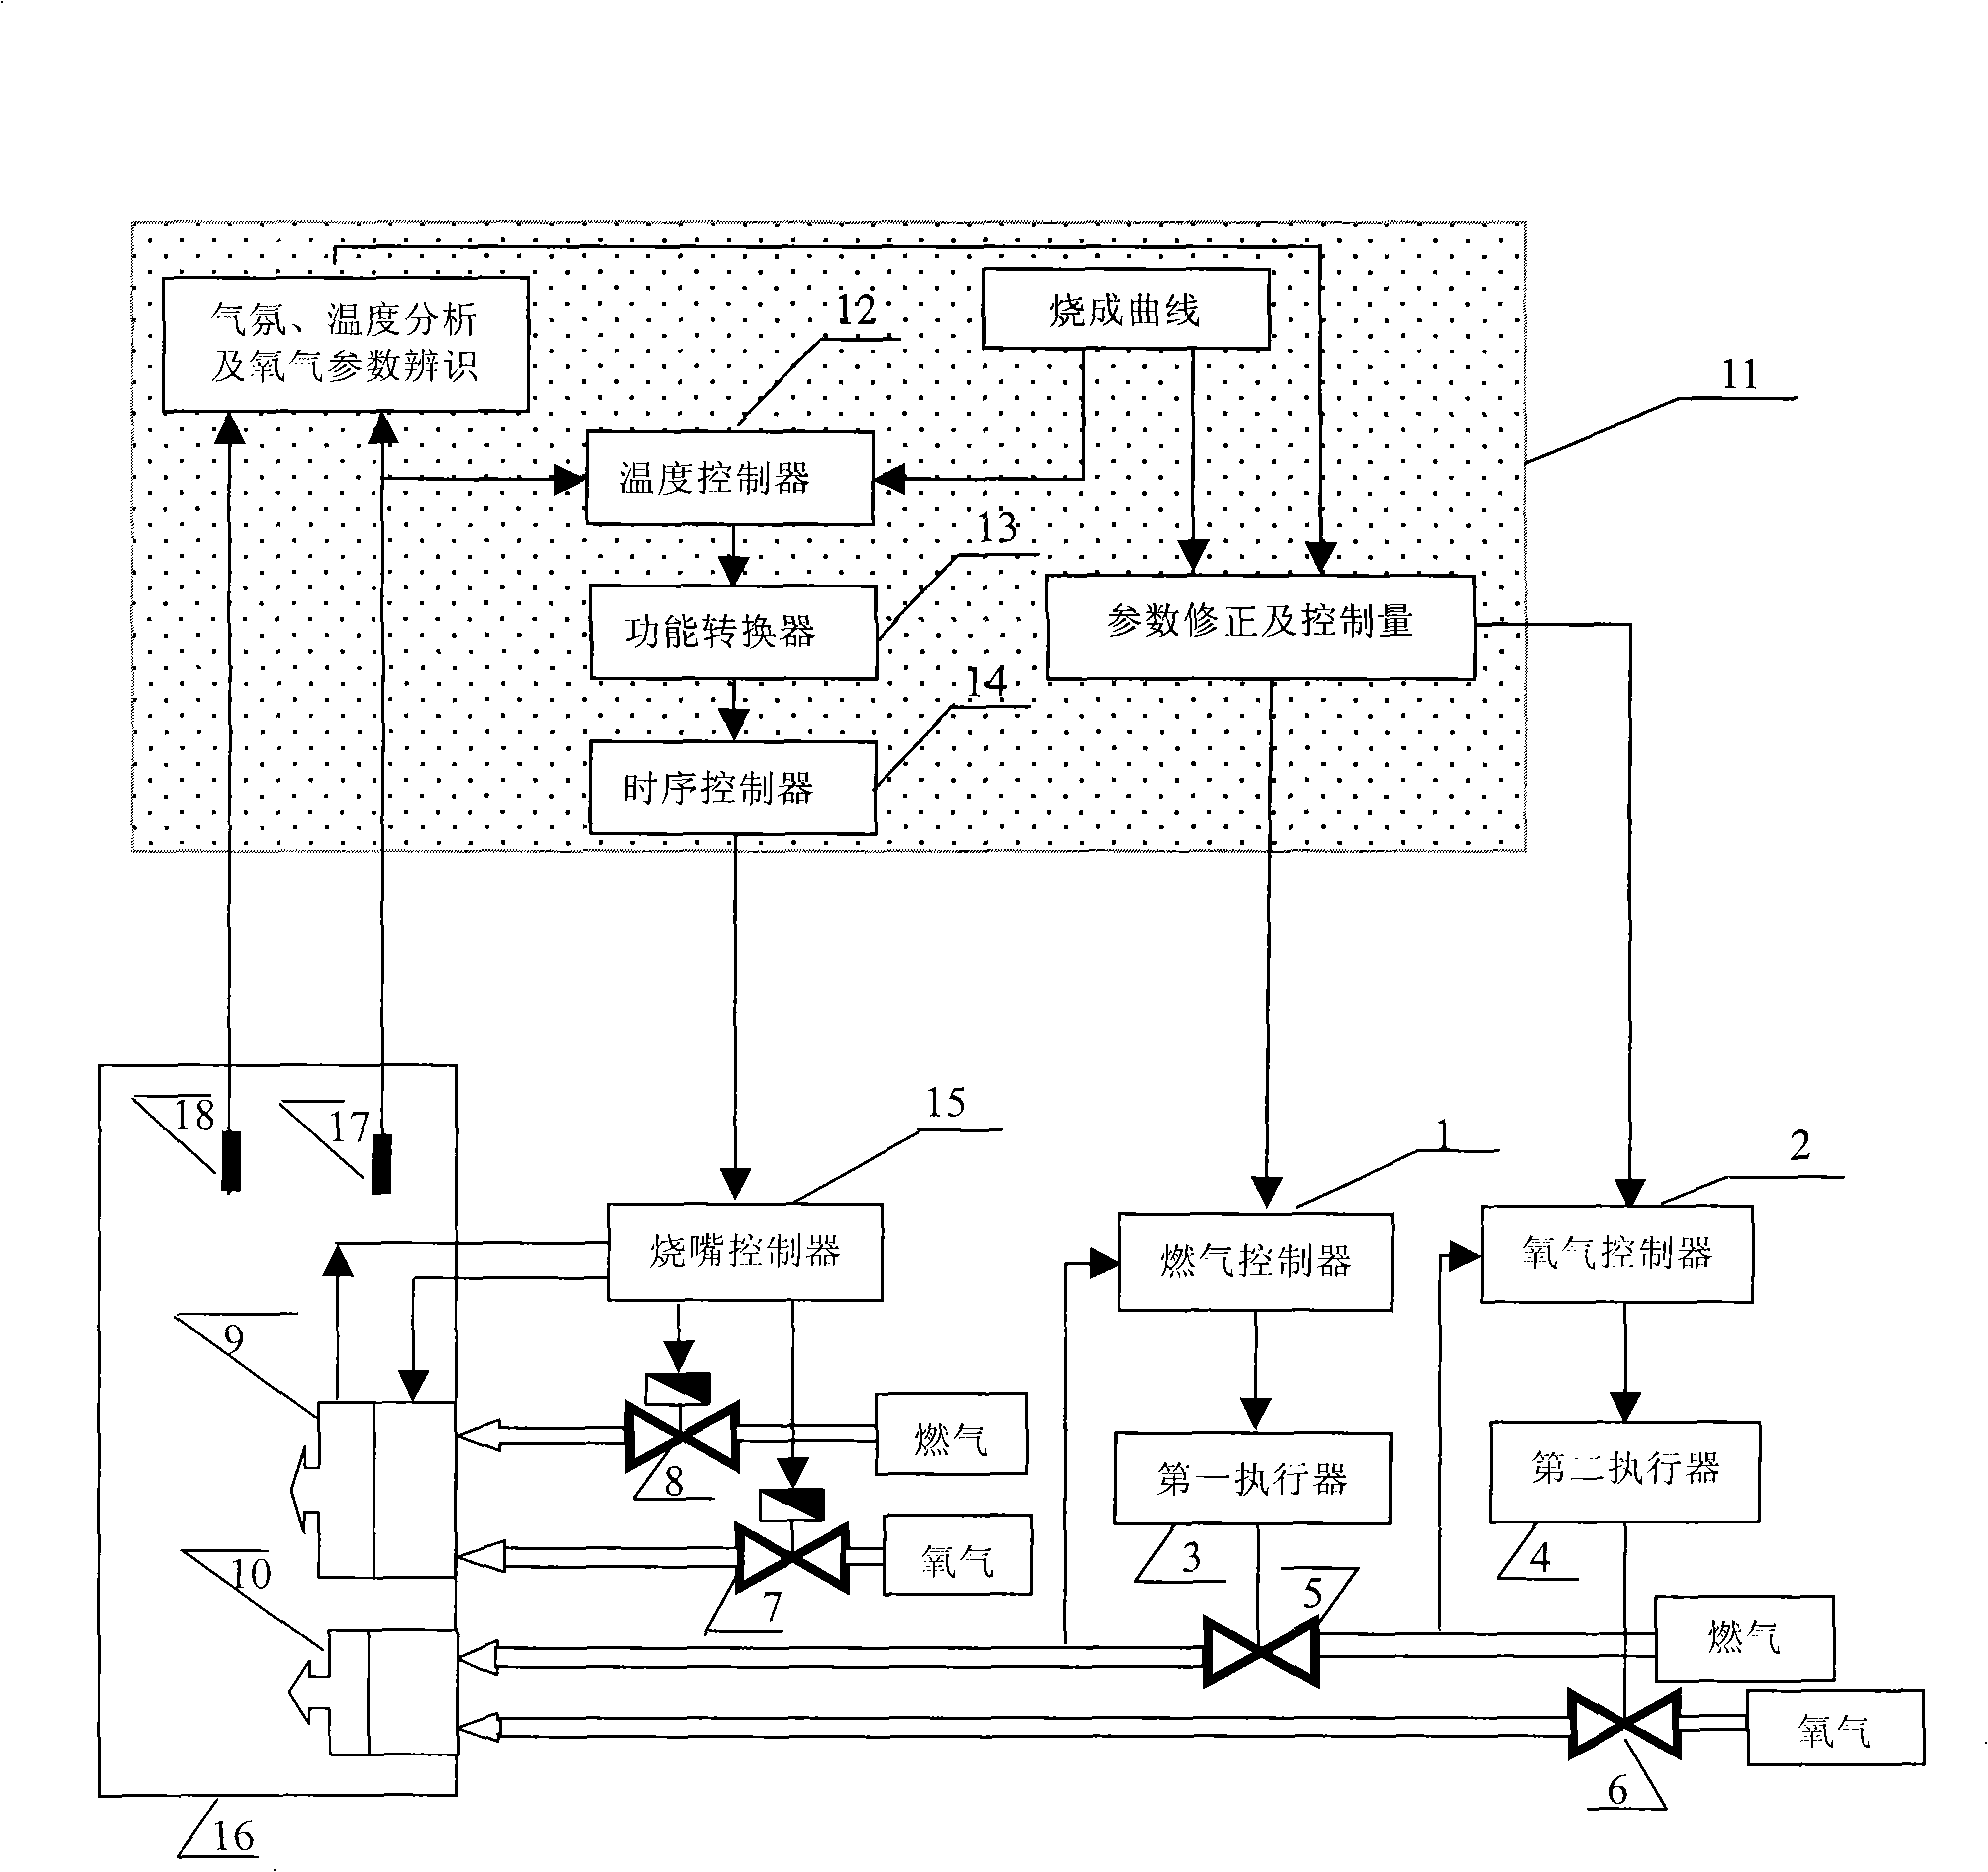 Mixed combustion control system of oxygen-enriched and full-oxygen combustion ceramic roller kiln